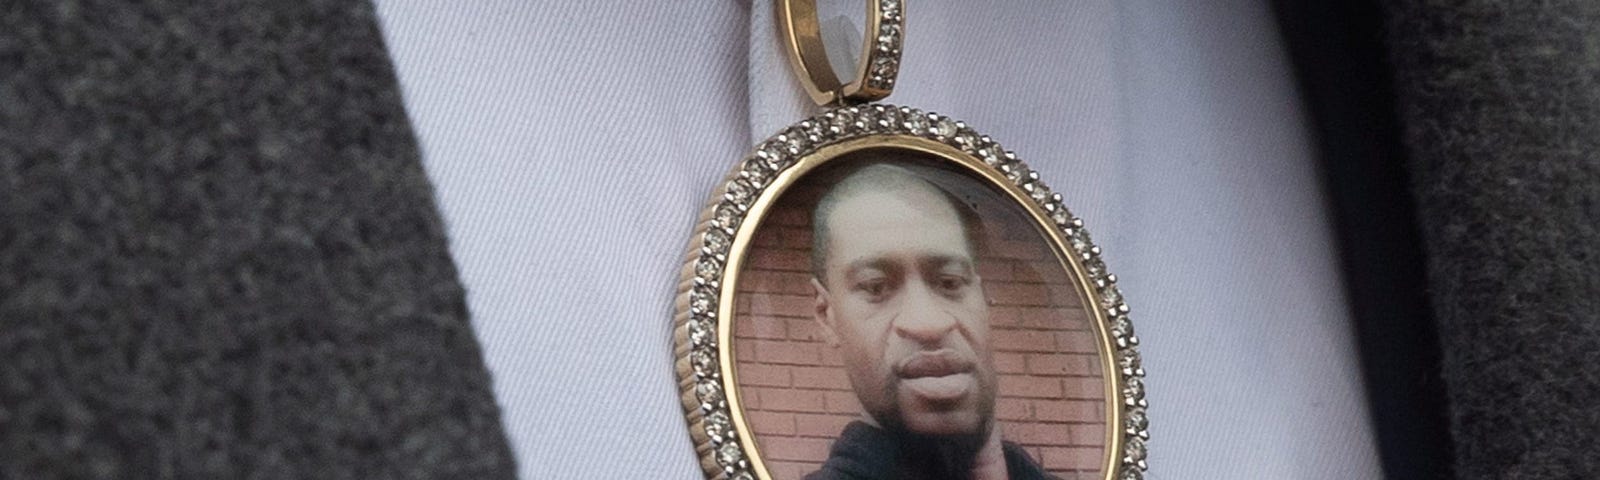 An image of George Floyd in a necklace worn by a family member.